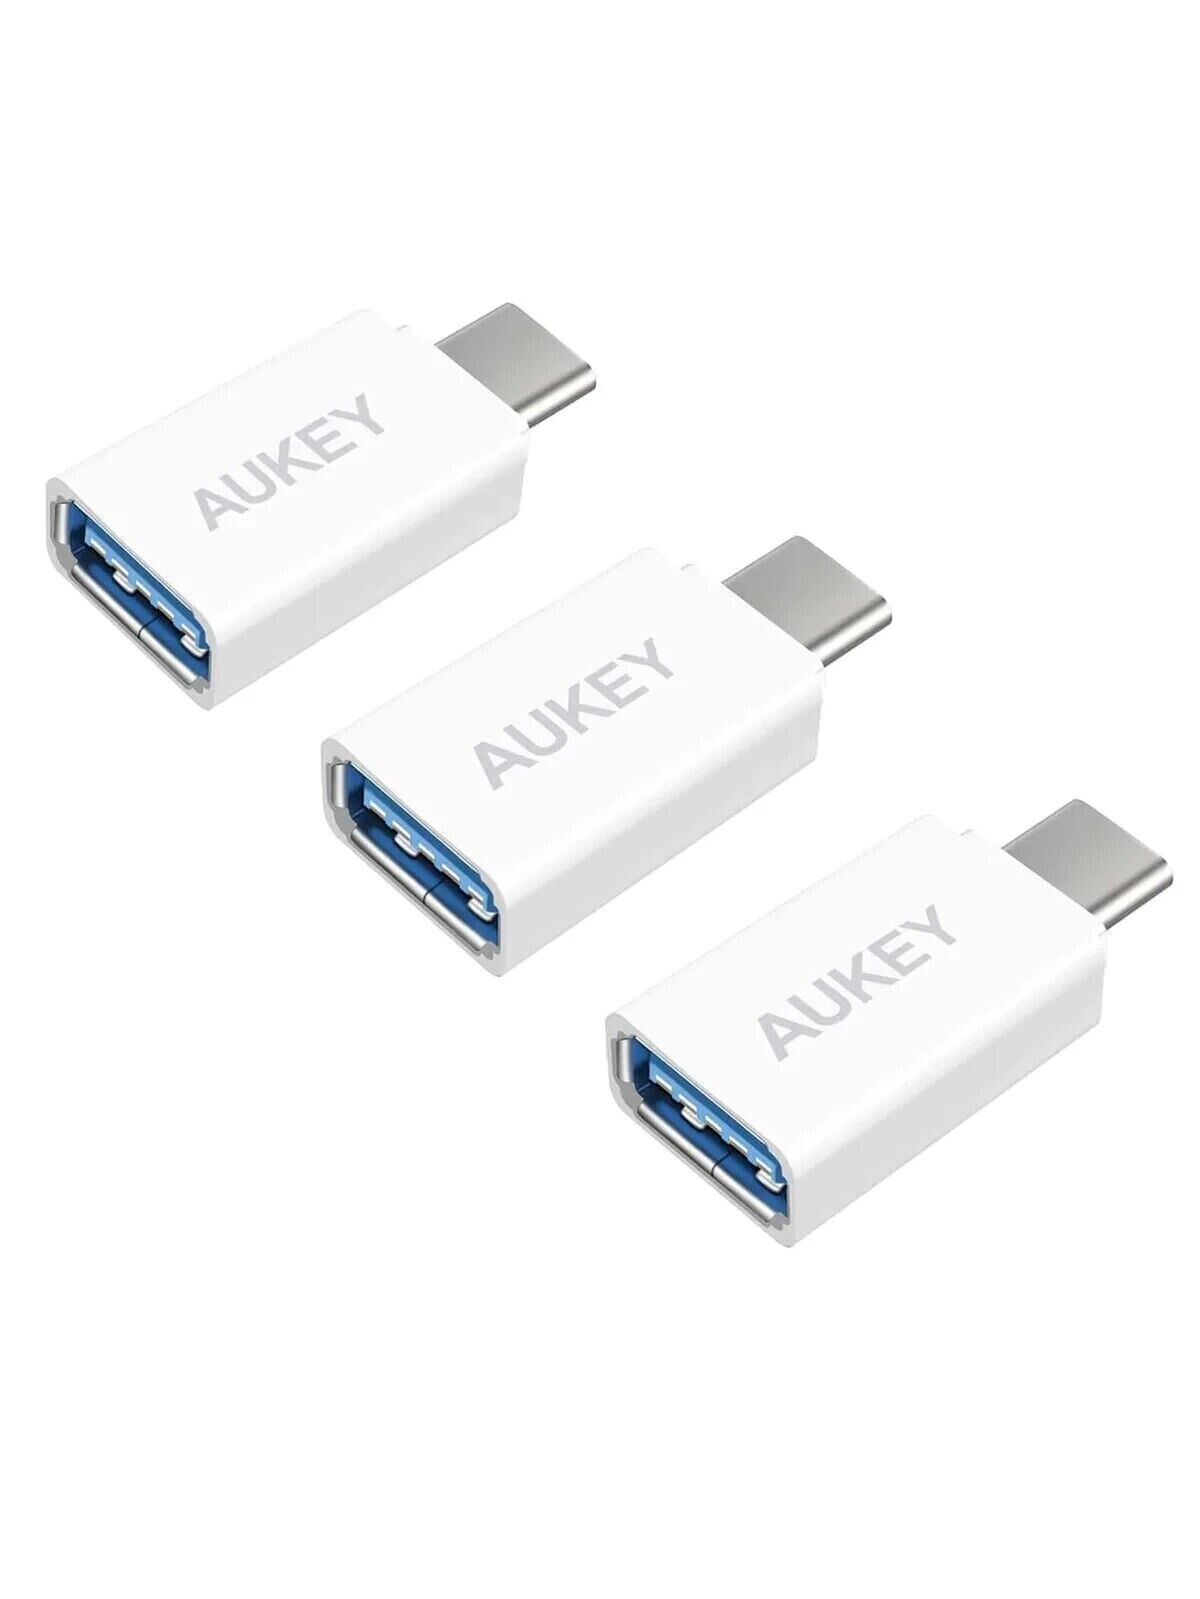 Aukey CB-A1 USB 3.0 A to C Adapter (3-Pack) CB-A1 White